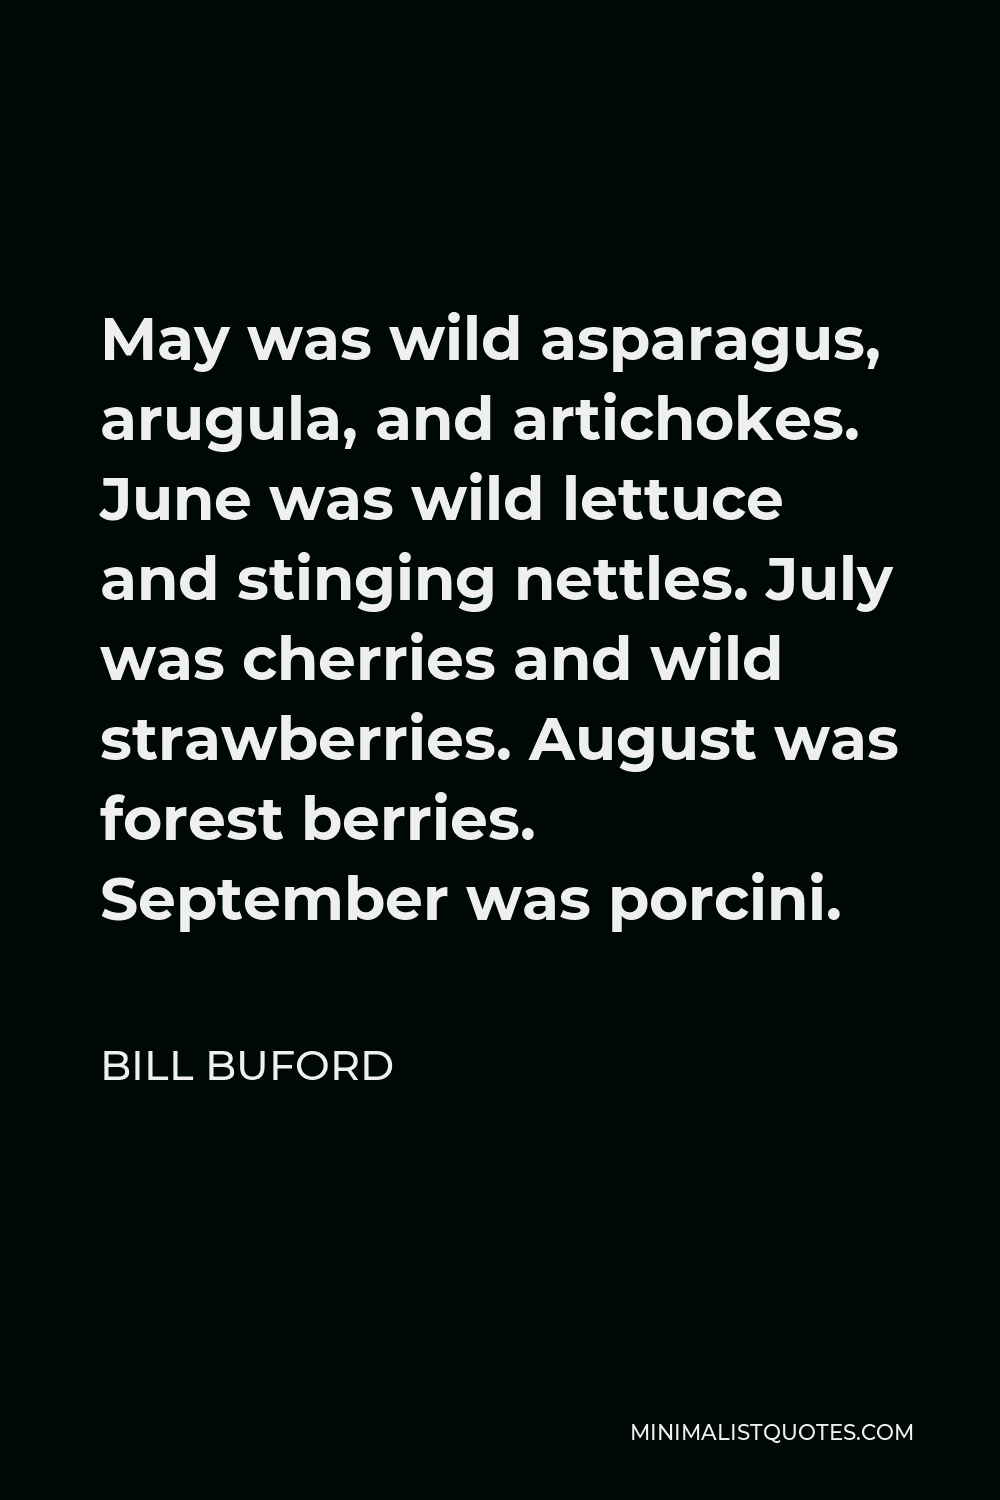 Bill Buford Quote - May was wild asparagus, arugula, and artichokes. June was wild lettuce and stinging nettles. July was cherries and wild strawberries. August was forest berries. September was porcini.